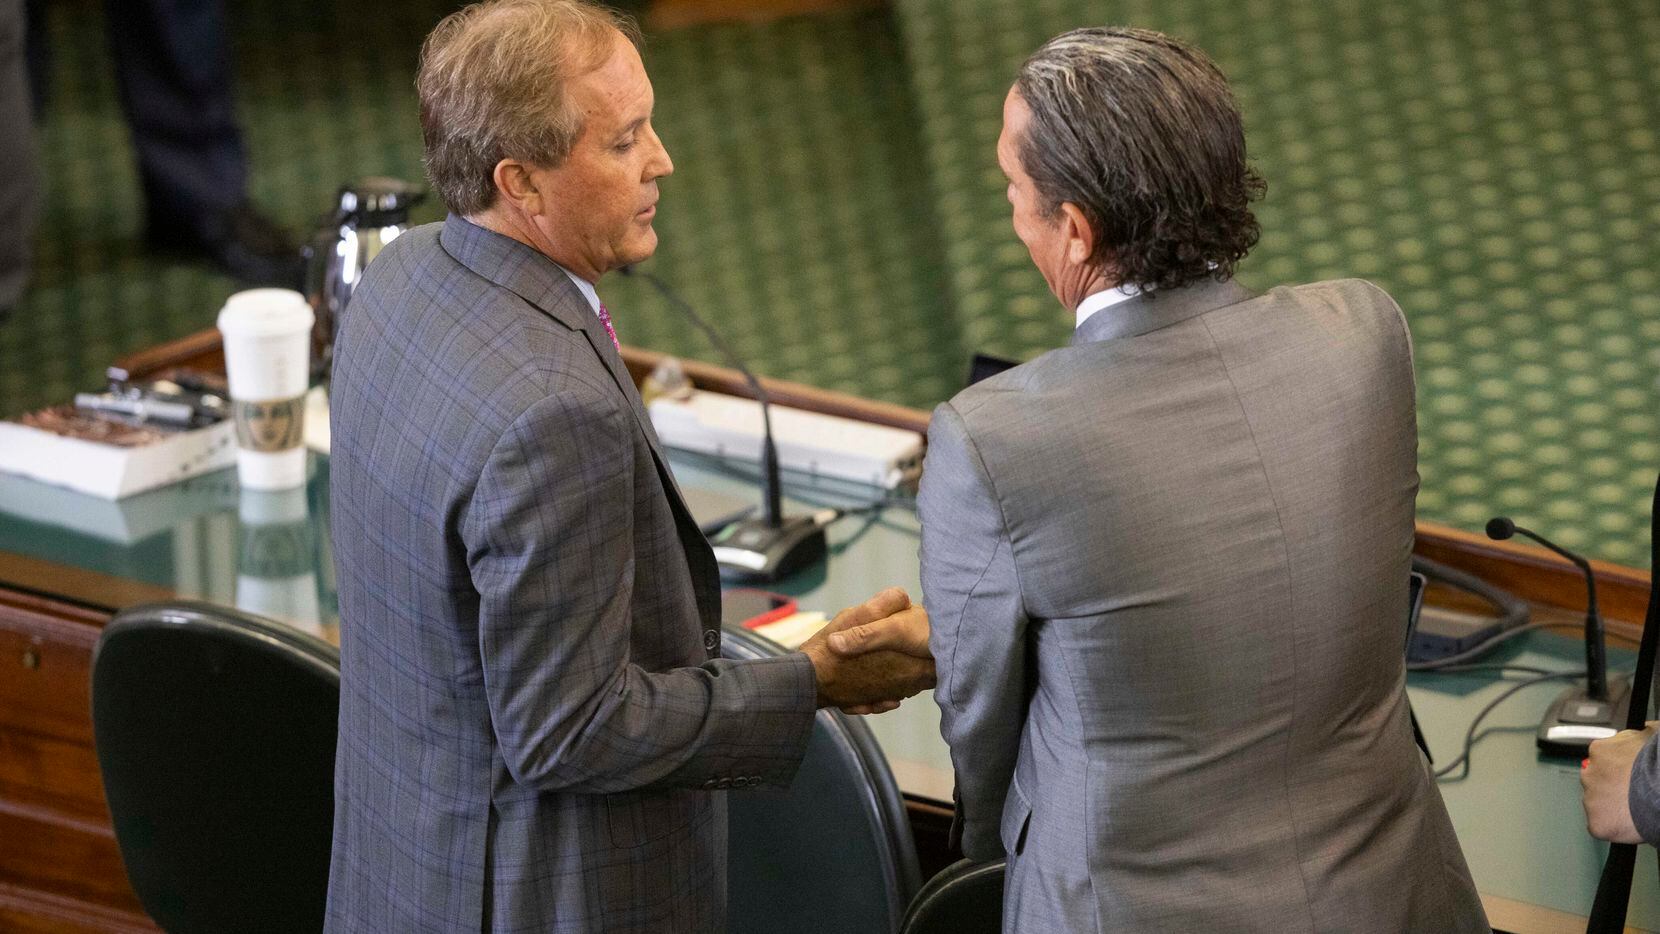 (From left) Texas Attorney General Ken Paxton shakes attorney Tony Buzbee’s hand after the...